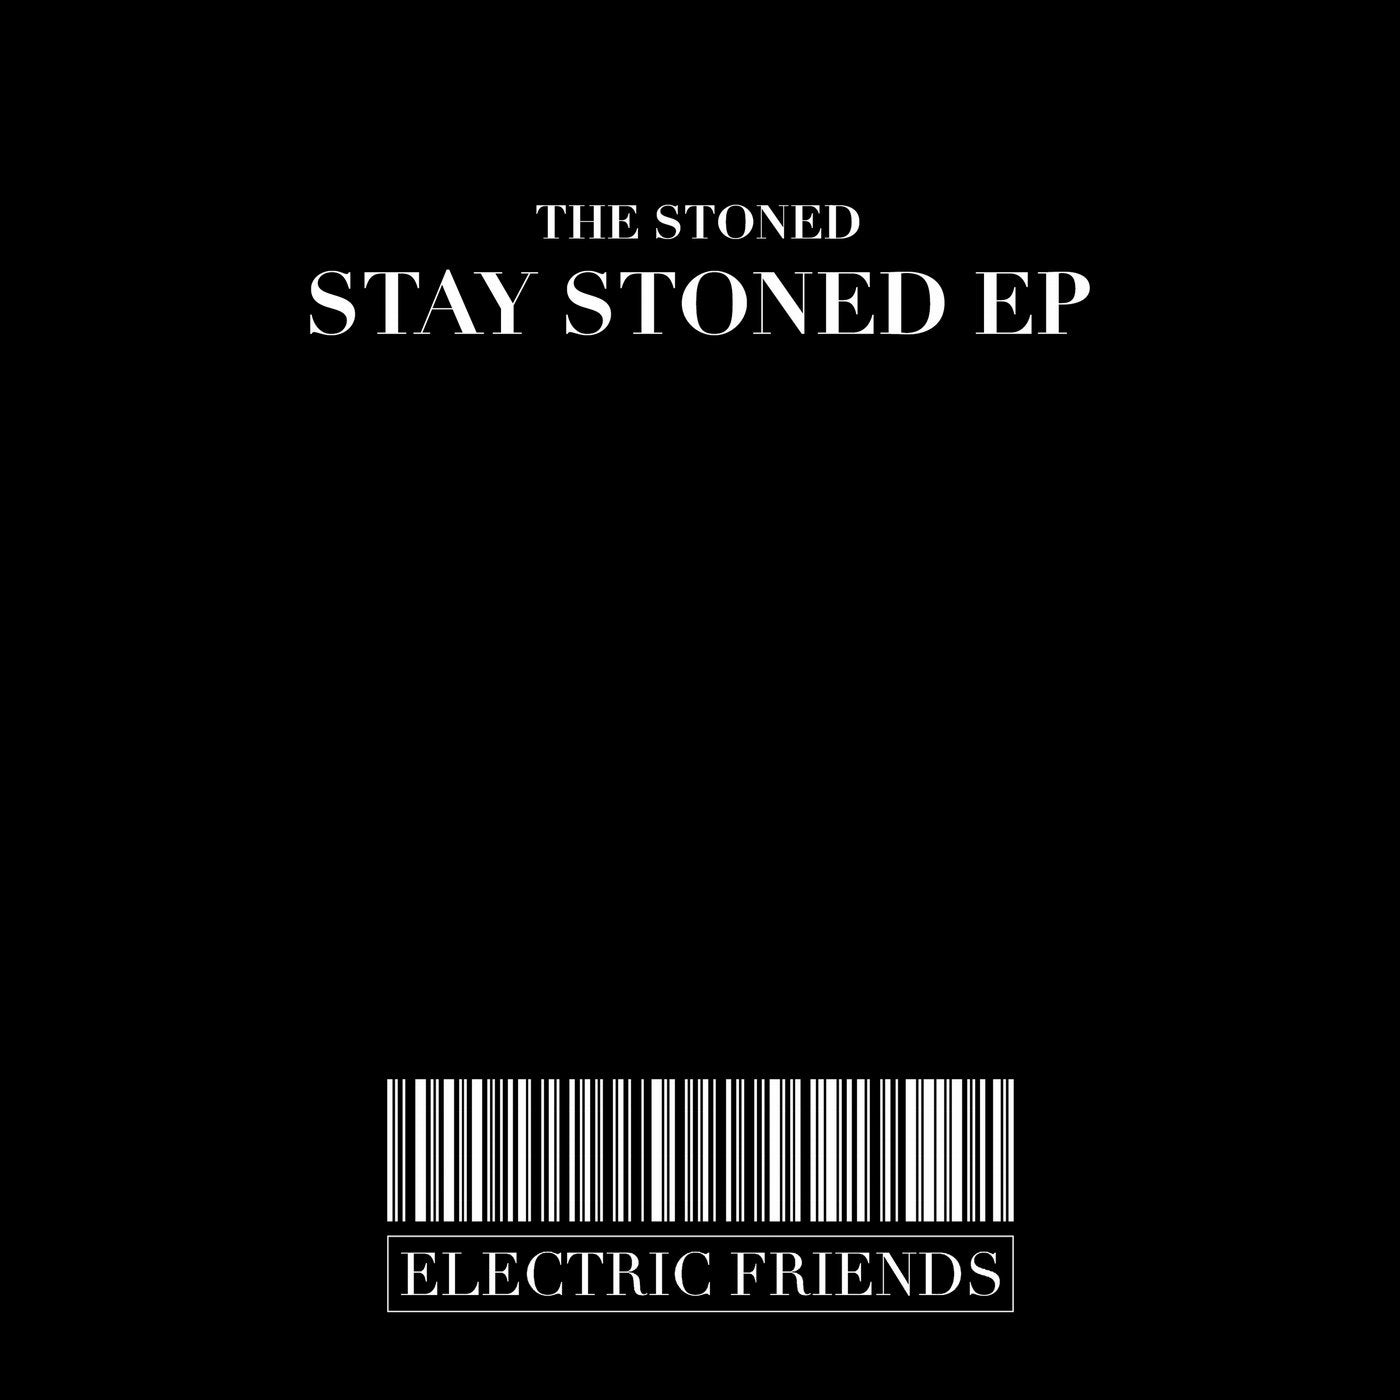 Stay Stoned EP